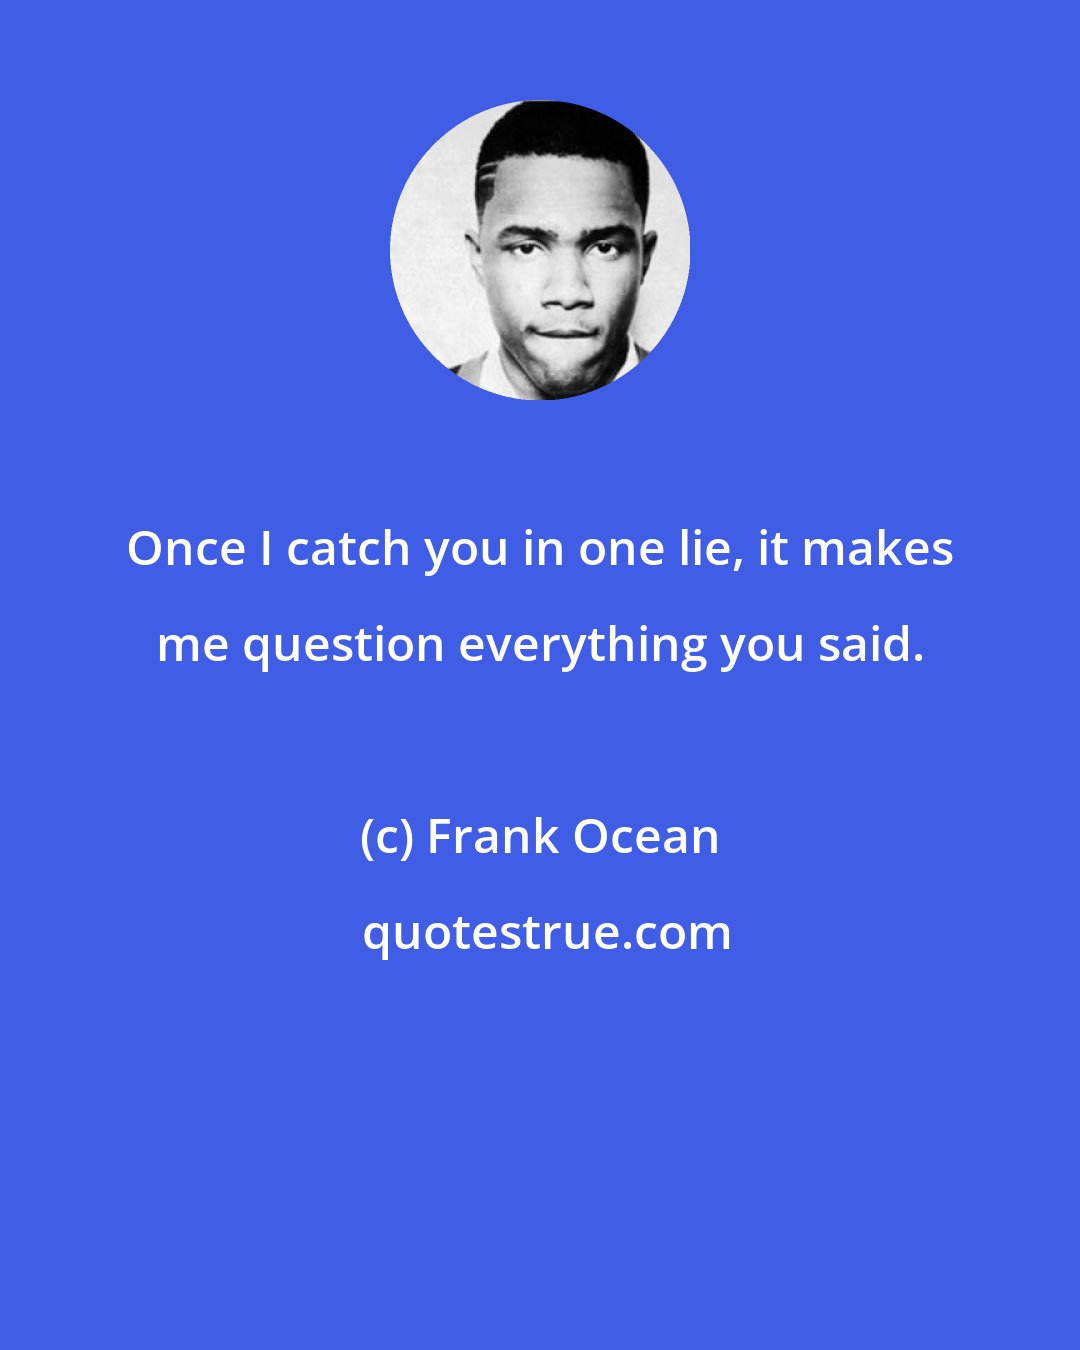 Frank Ocean: Once I catch you in one lie, it makes me question everything you said.